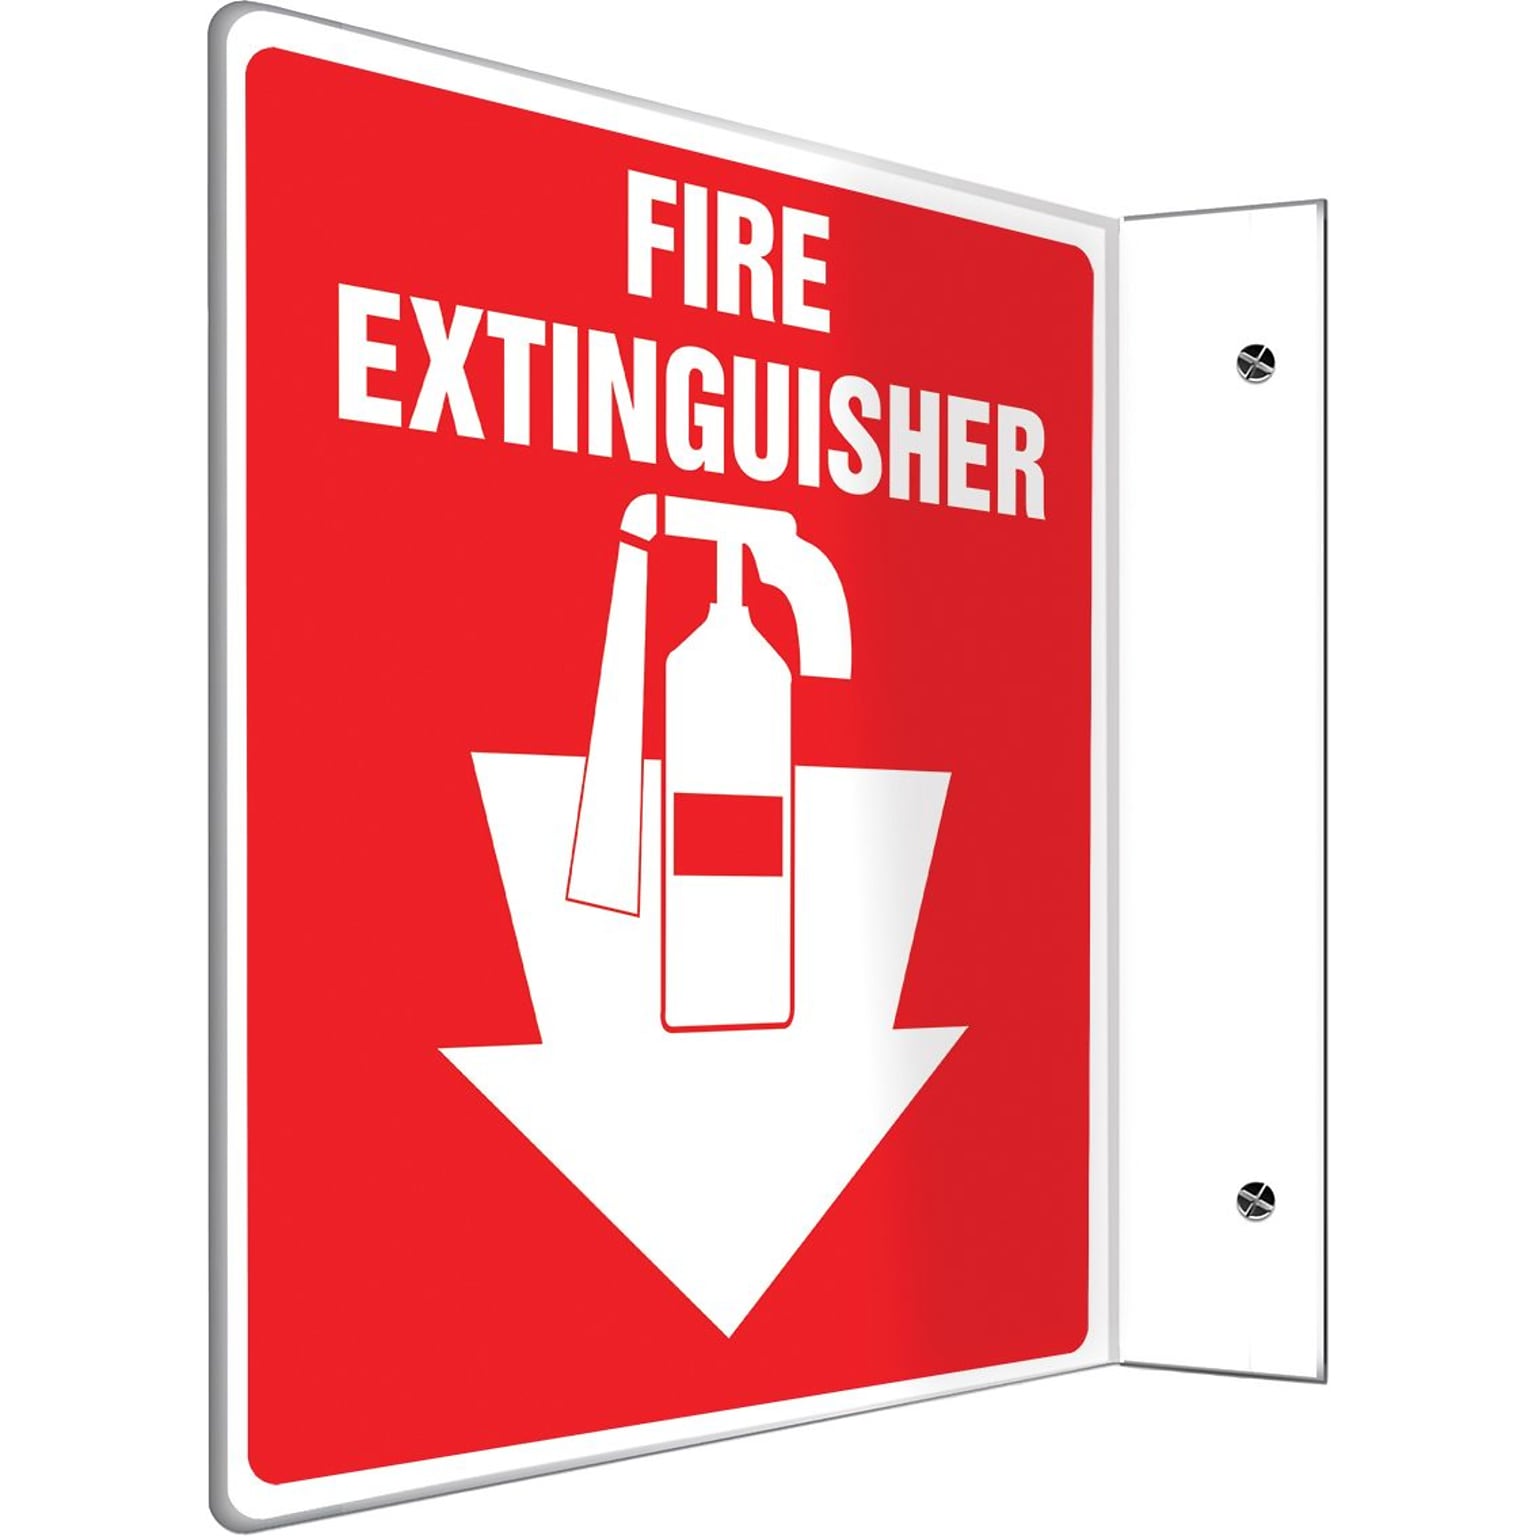 Accuform Fire Extinguisher Projection Sign, White/Red, 8H x 8W (PSP707)